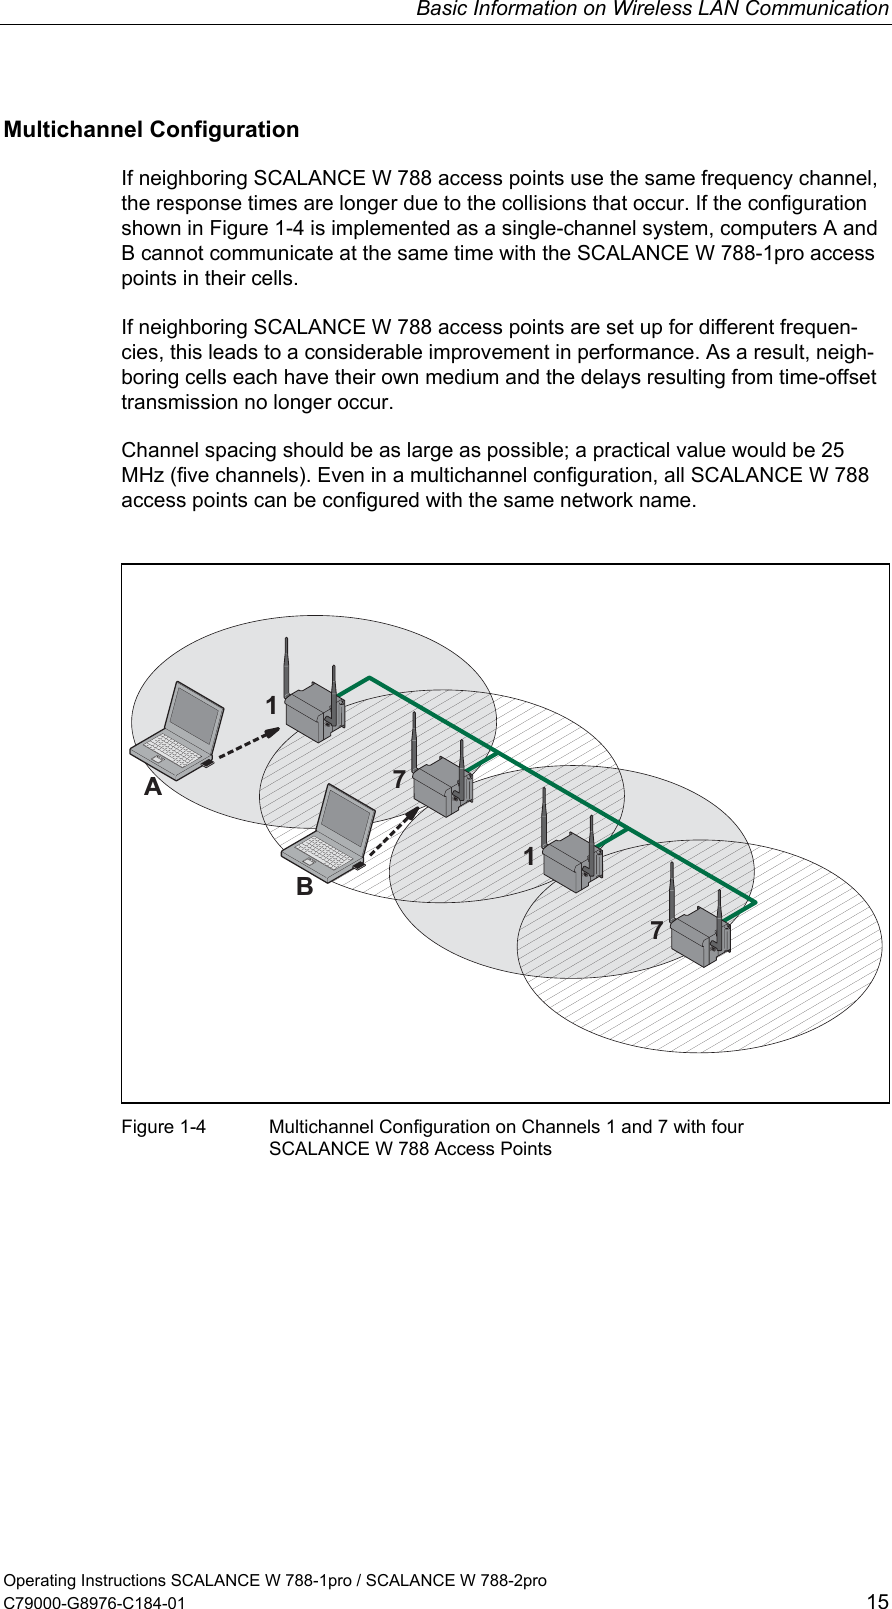 Basic Information on Wireless LAN Communication Multichannel Configuration If neighboring SCALANCE W 788 access points use the same frequency channel, the response times are longer due to the collisions that occur. If the configuration shown in Figure 1-4 is implemented as a single-channel system, computers A and B cannot communicate at the same time with the SCALANCE W 788-1pro access points in their cells. If neighboring SCALANCE W 788 access points are set up for different frequen-cies, this leads to a considerable improvement in performance. As a result, neigh-boring cells each have their own medium and the delays resulting from time-offset transmission no longer occur. Channel spacing should be as large as possible; a practical value would be 25 MHz (five channels). Even in a multichannel configuration, all SCALANCE W 788 access points can be configured with the same network name.   1177ABFigure 1-4  Multichannel Configuration on Channels 1 and 7 with four SCALANCE W 788 Access Points  Operating Instructions SCALANCE W 788-1pro / SCALANCE W 788-2pro C79000-G8976-C184-01  15 